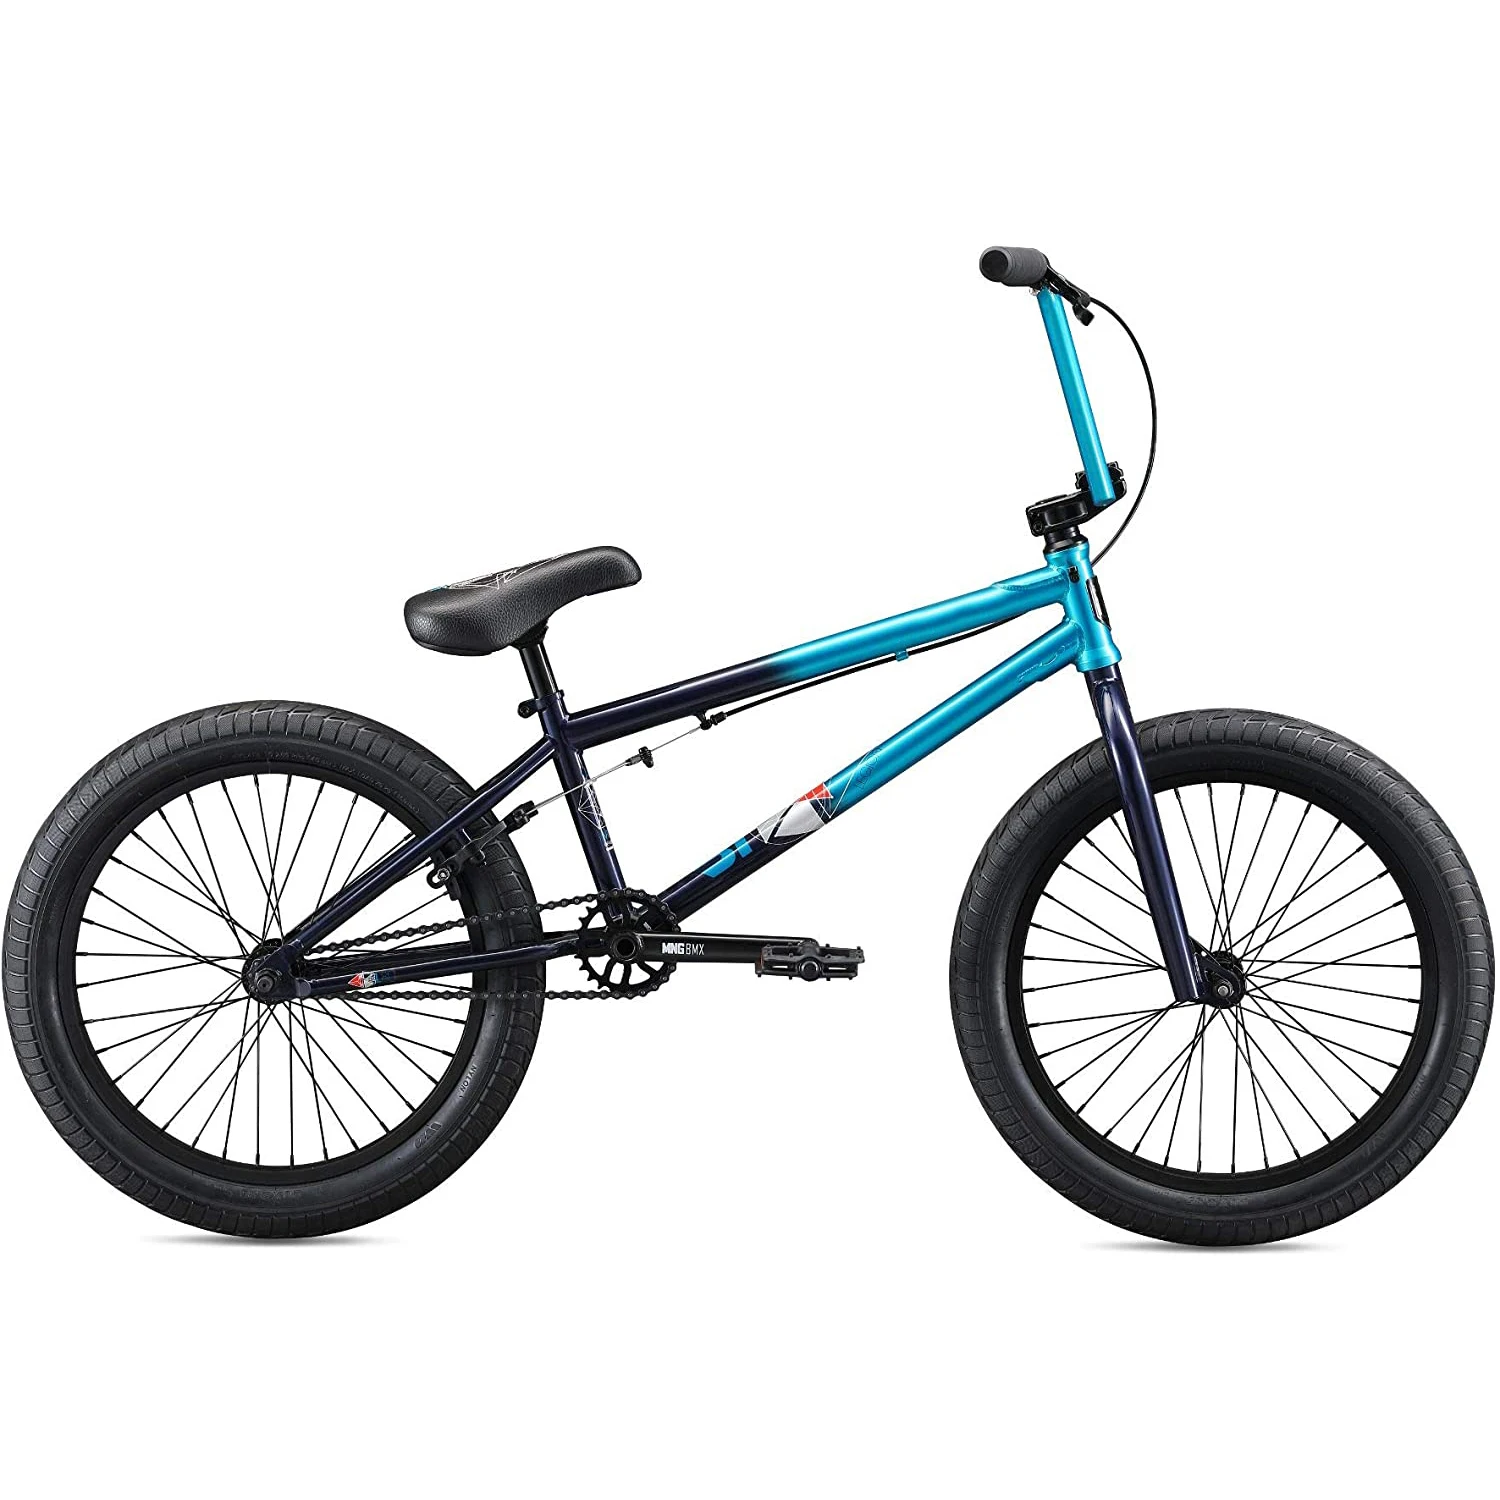 

16 inch 20 inch 24 26 inch mini race bmx bike cycle bicycle bicycles bisicletas BMX bikes street freestyle cheap cycle for man, Customized